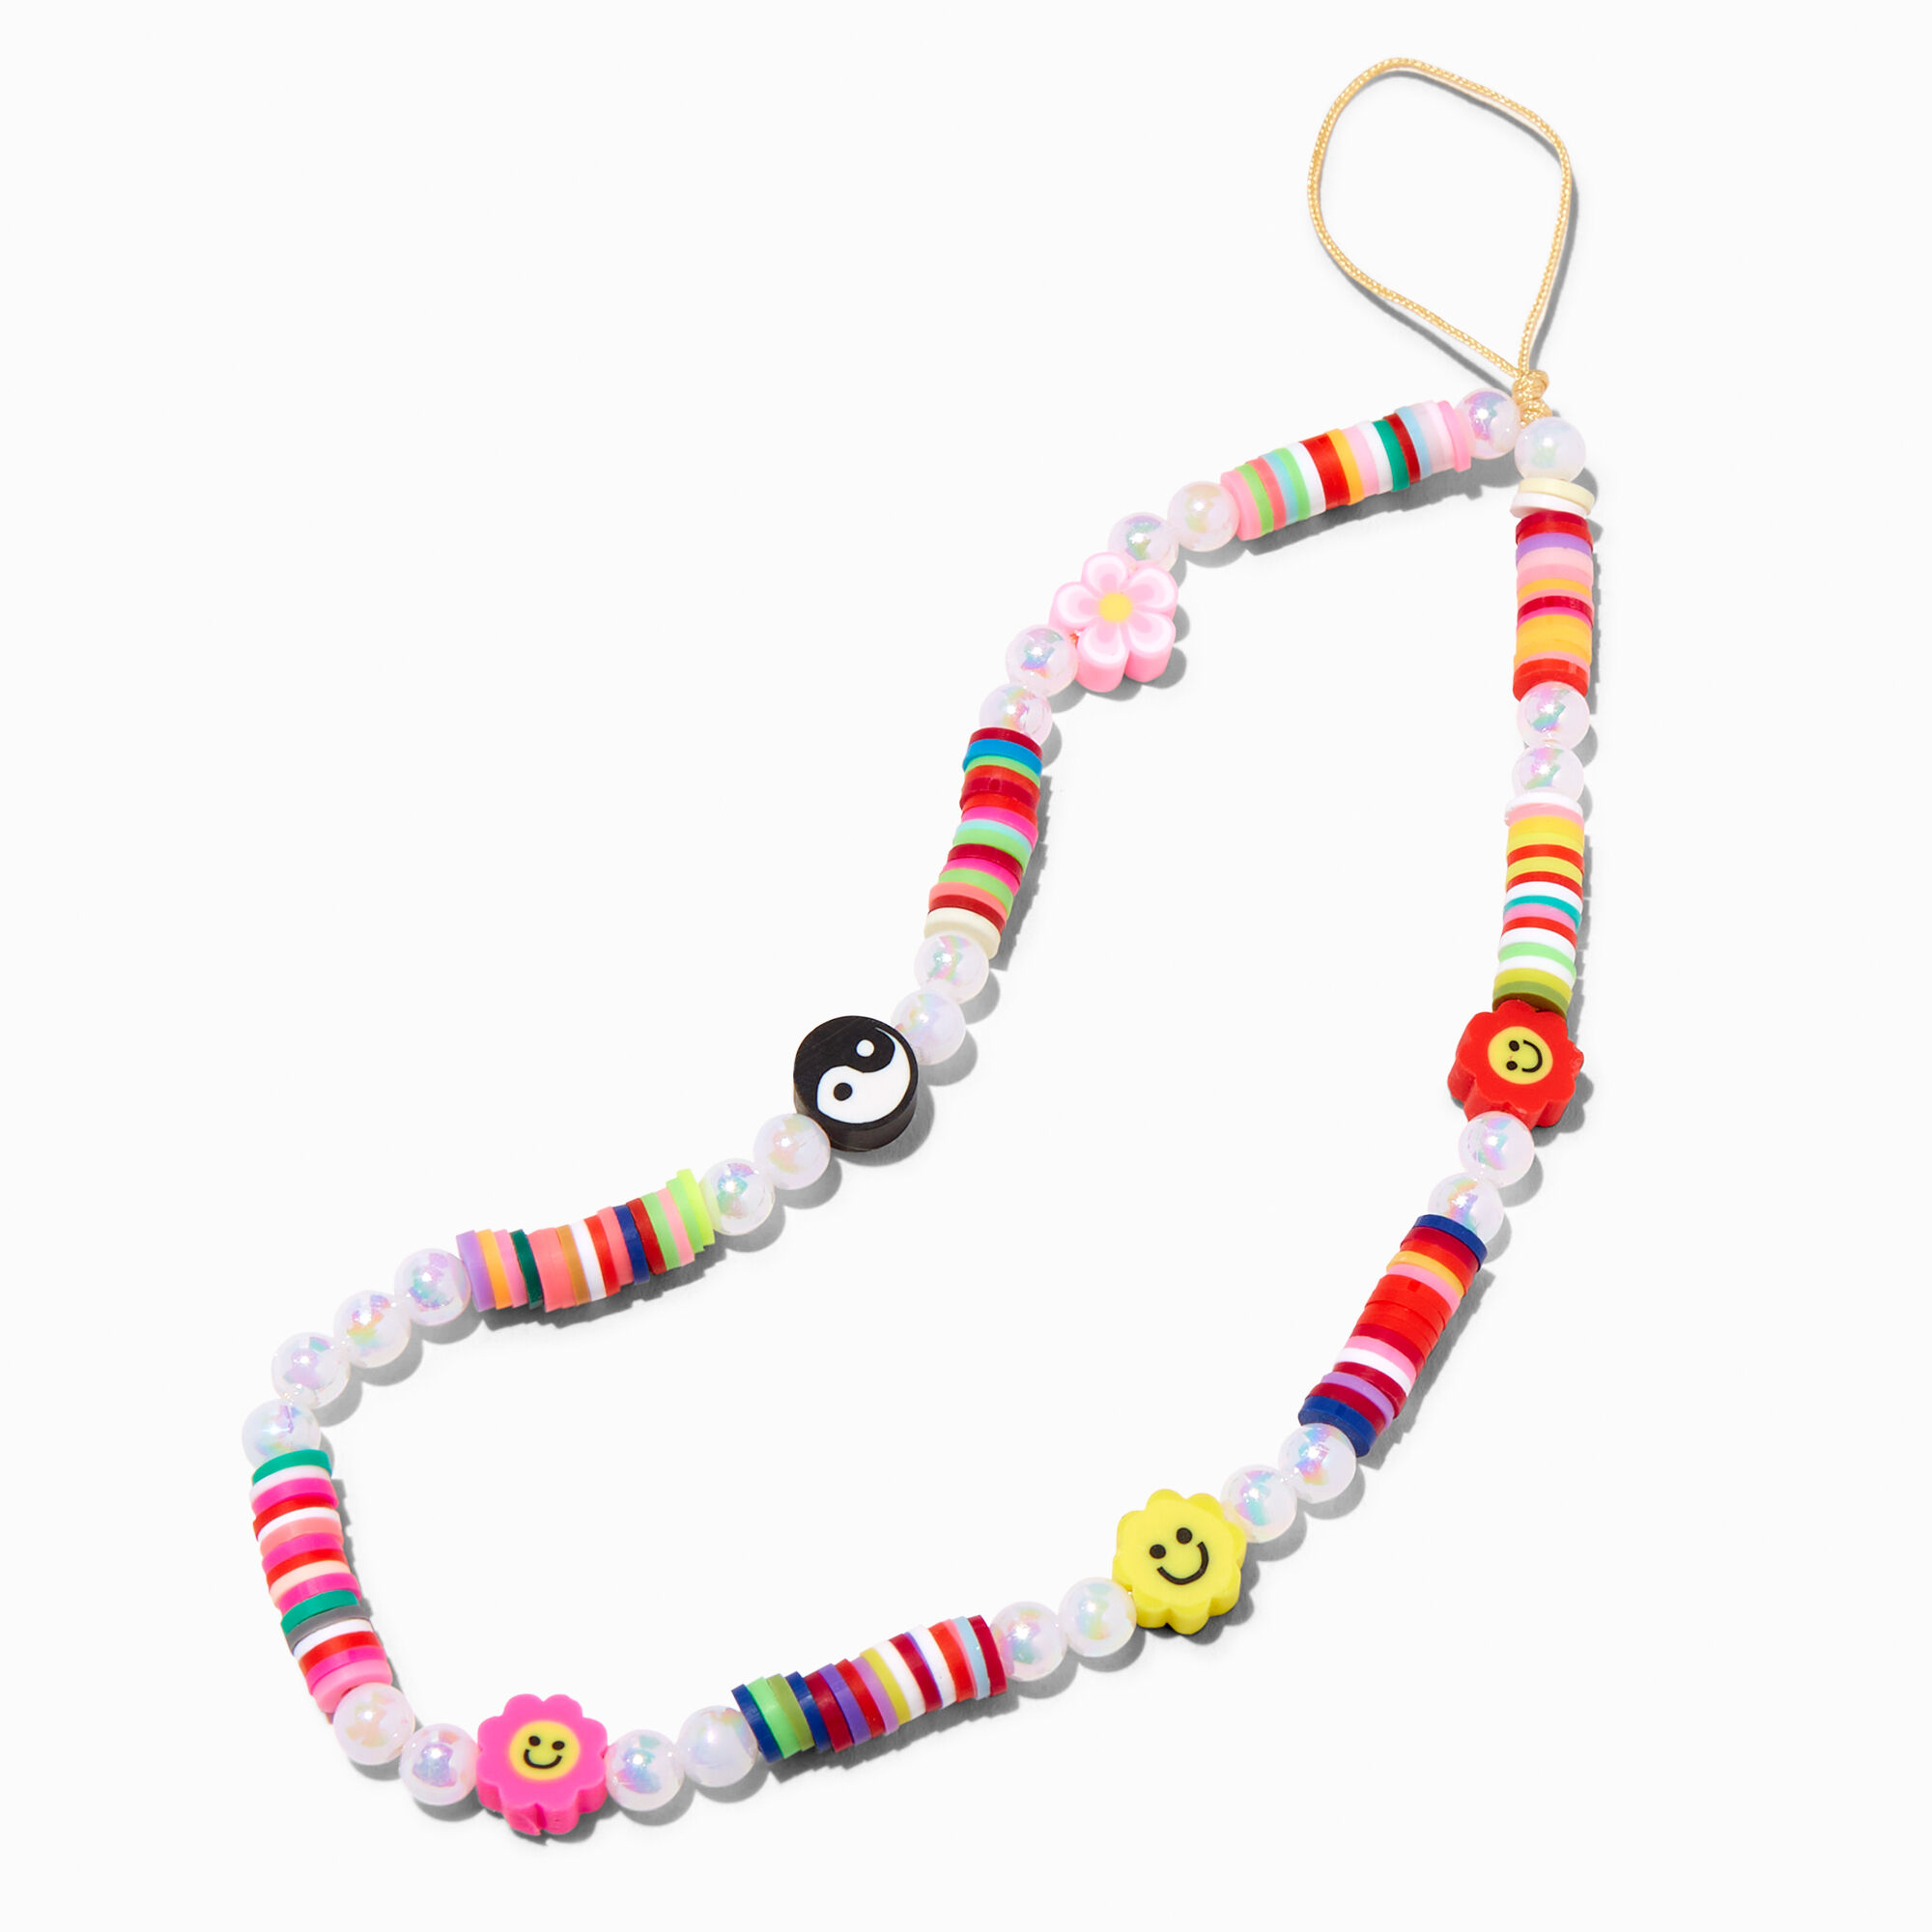 View Claires Happy Face Beaded Phone Wrist Strap Rainbow information